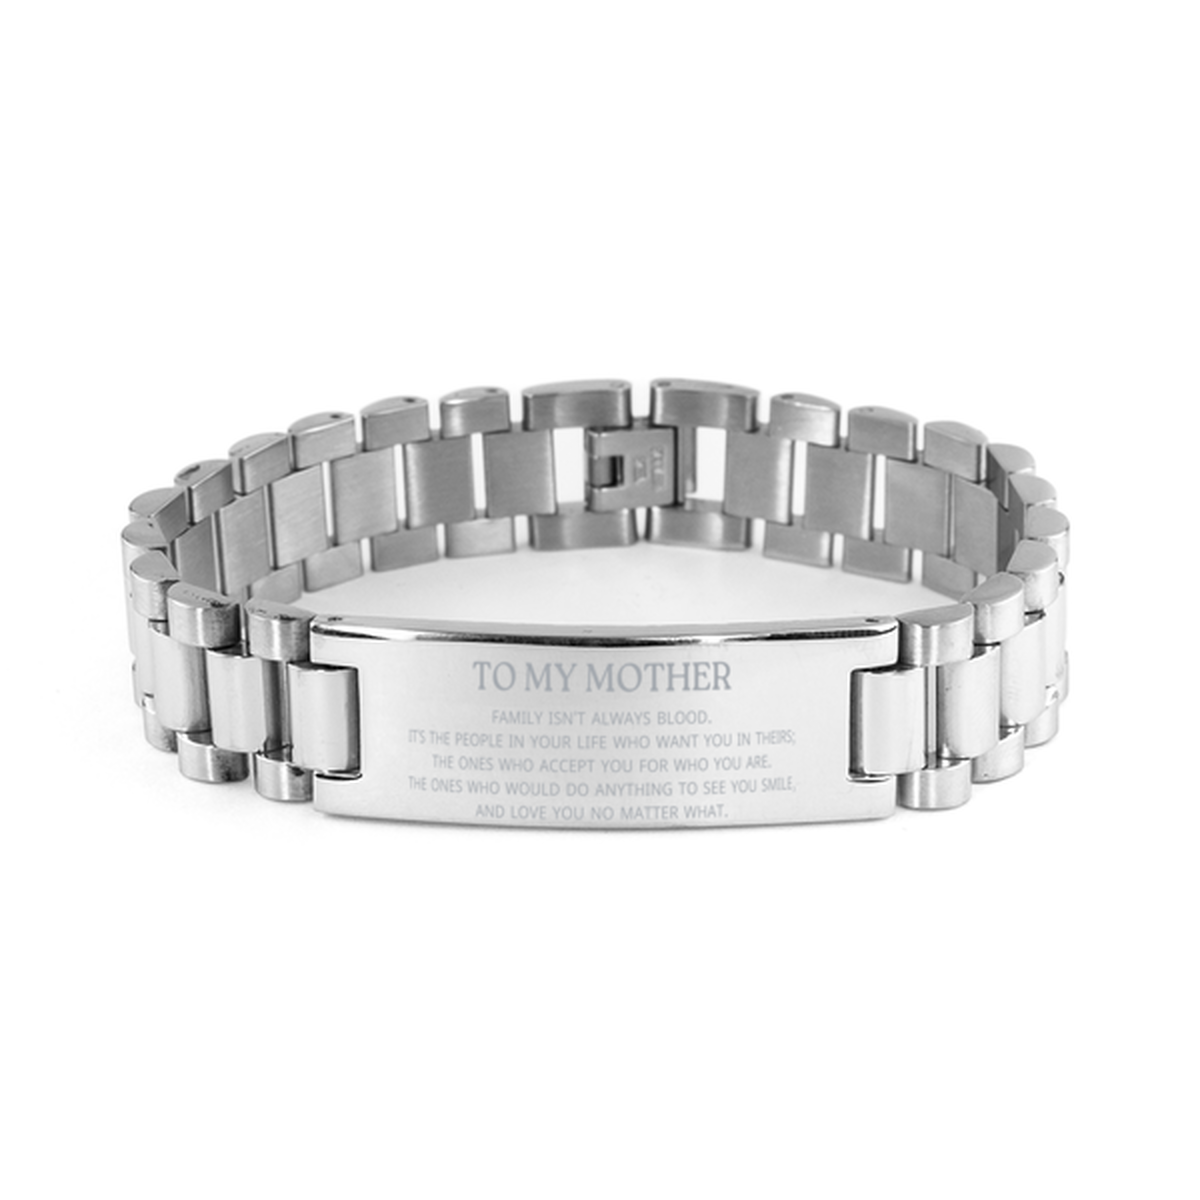 To My Mother Gifts, Family isn't always blood, Mother Ladder Stainless Steel Bracelet, Birthday Christmas Unique Present For Mother